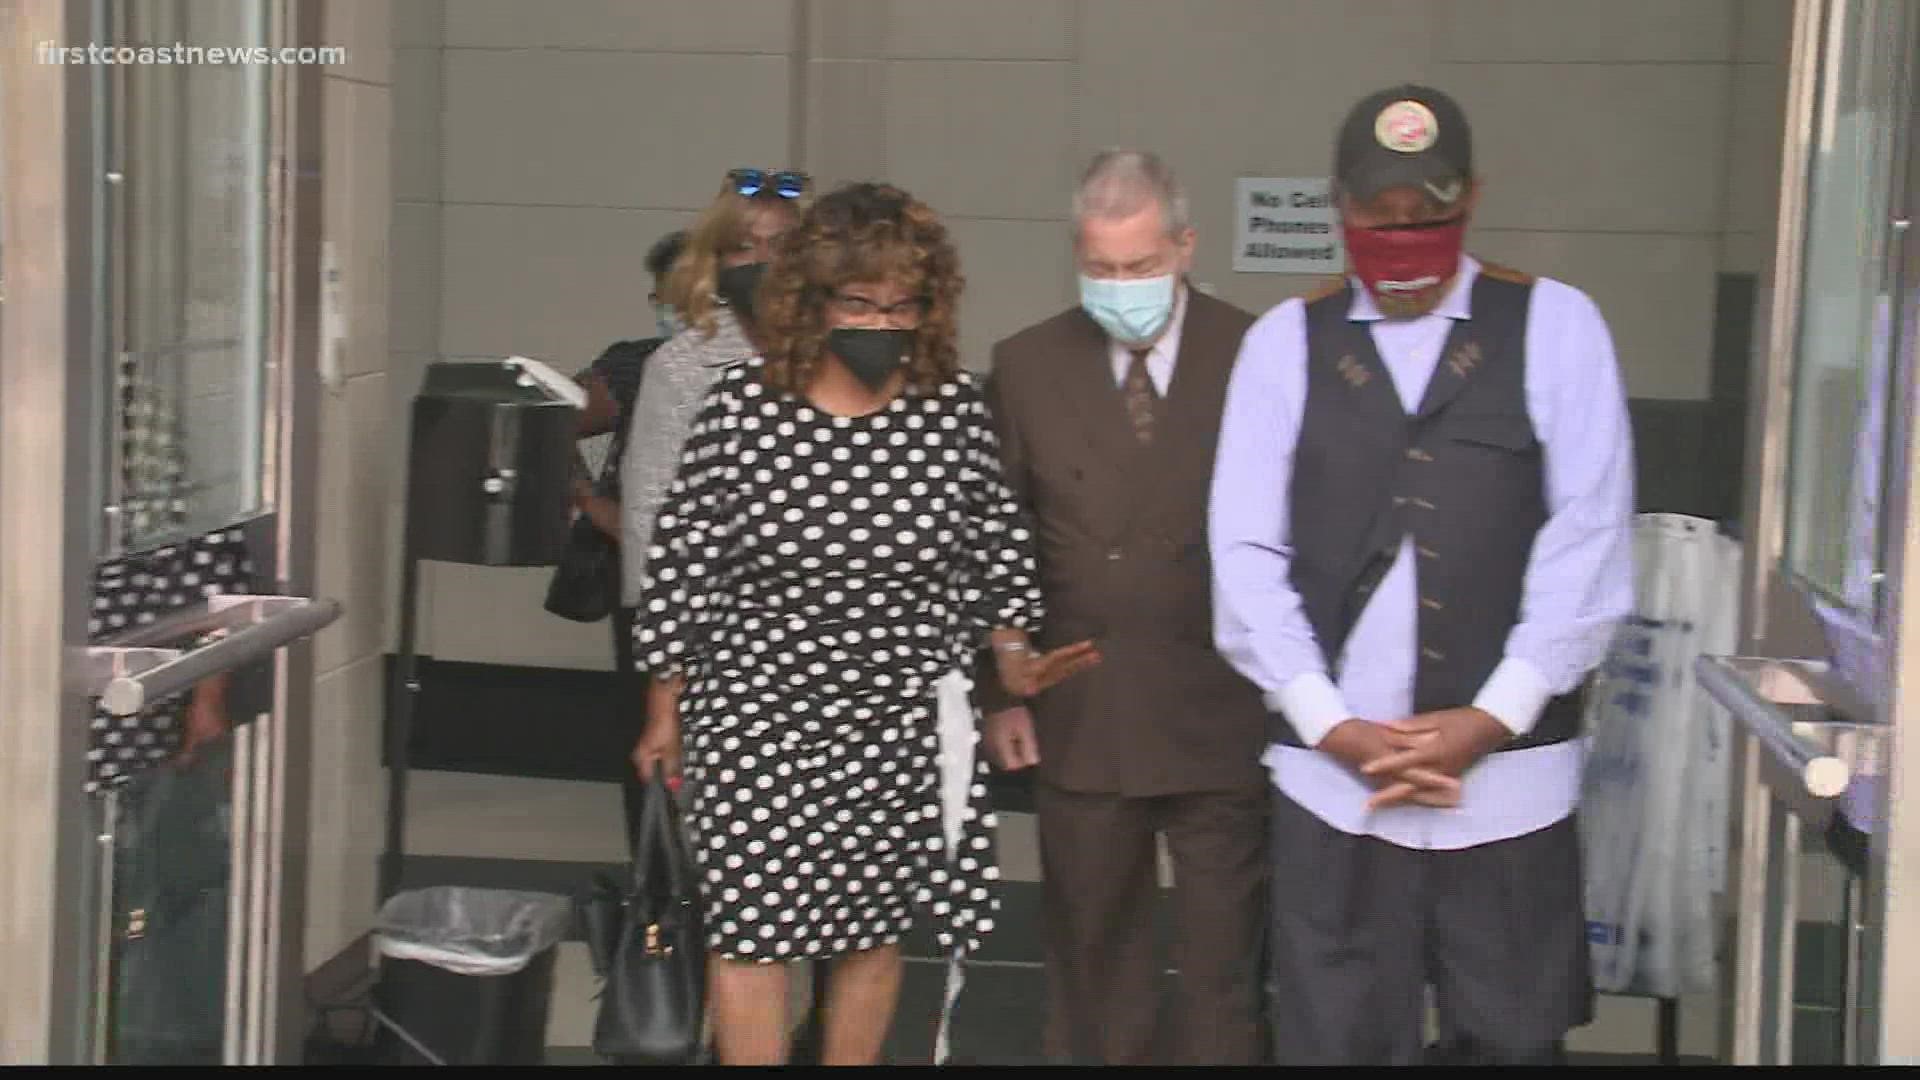 Brown requested court-appointed attorney, saying she was low on money after her 2015 conviction on fraud charges was overturned.